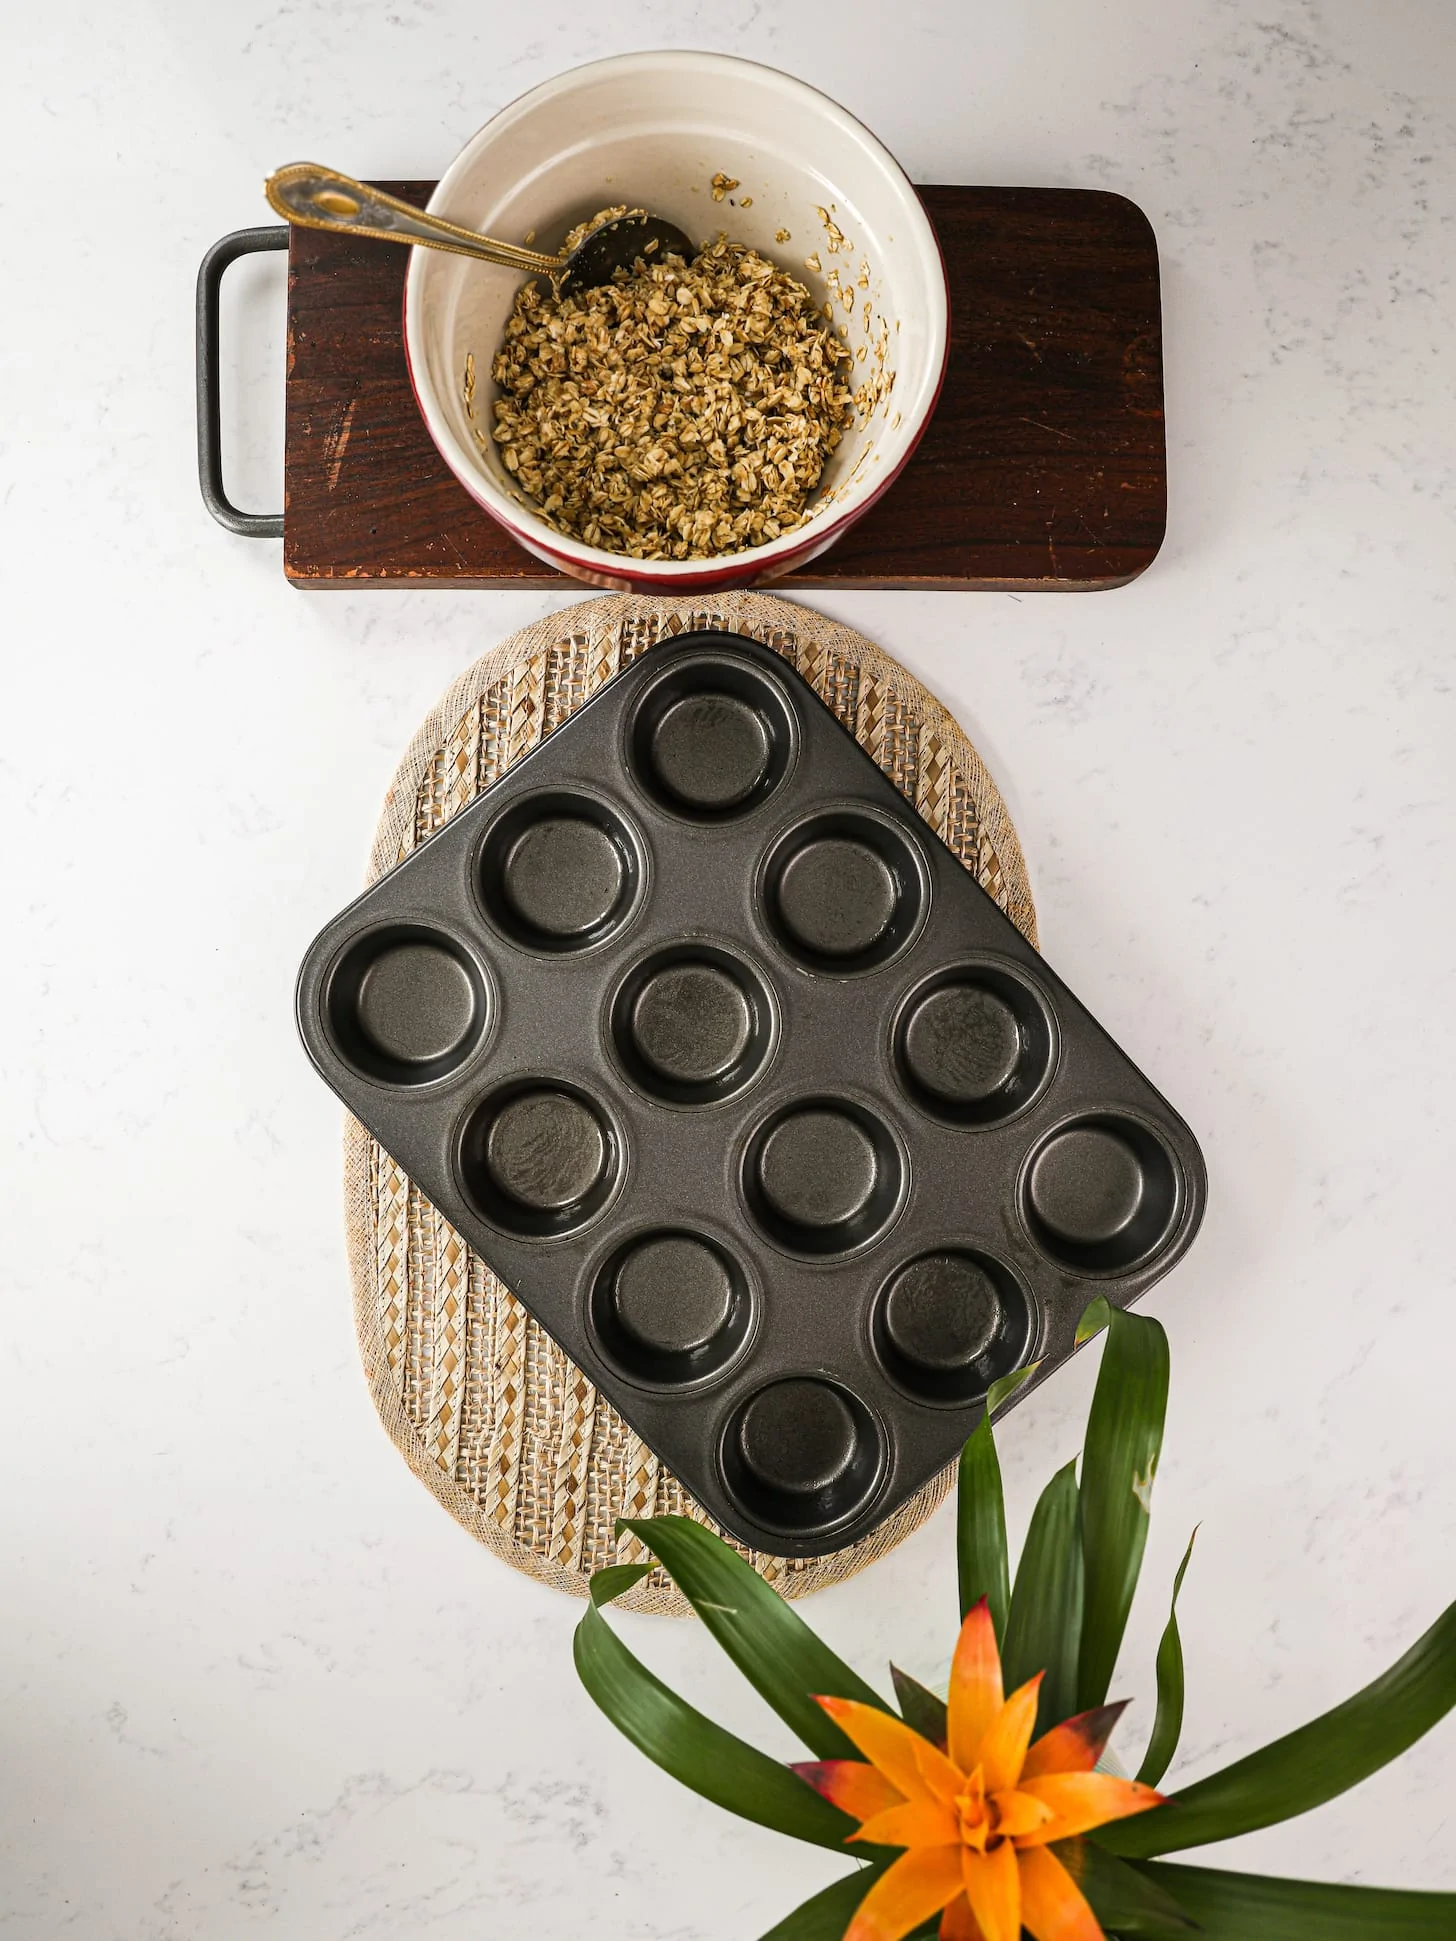 a greased cupcake pan with a bowl of oats next to it. There is also a plant in one corner.